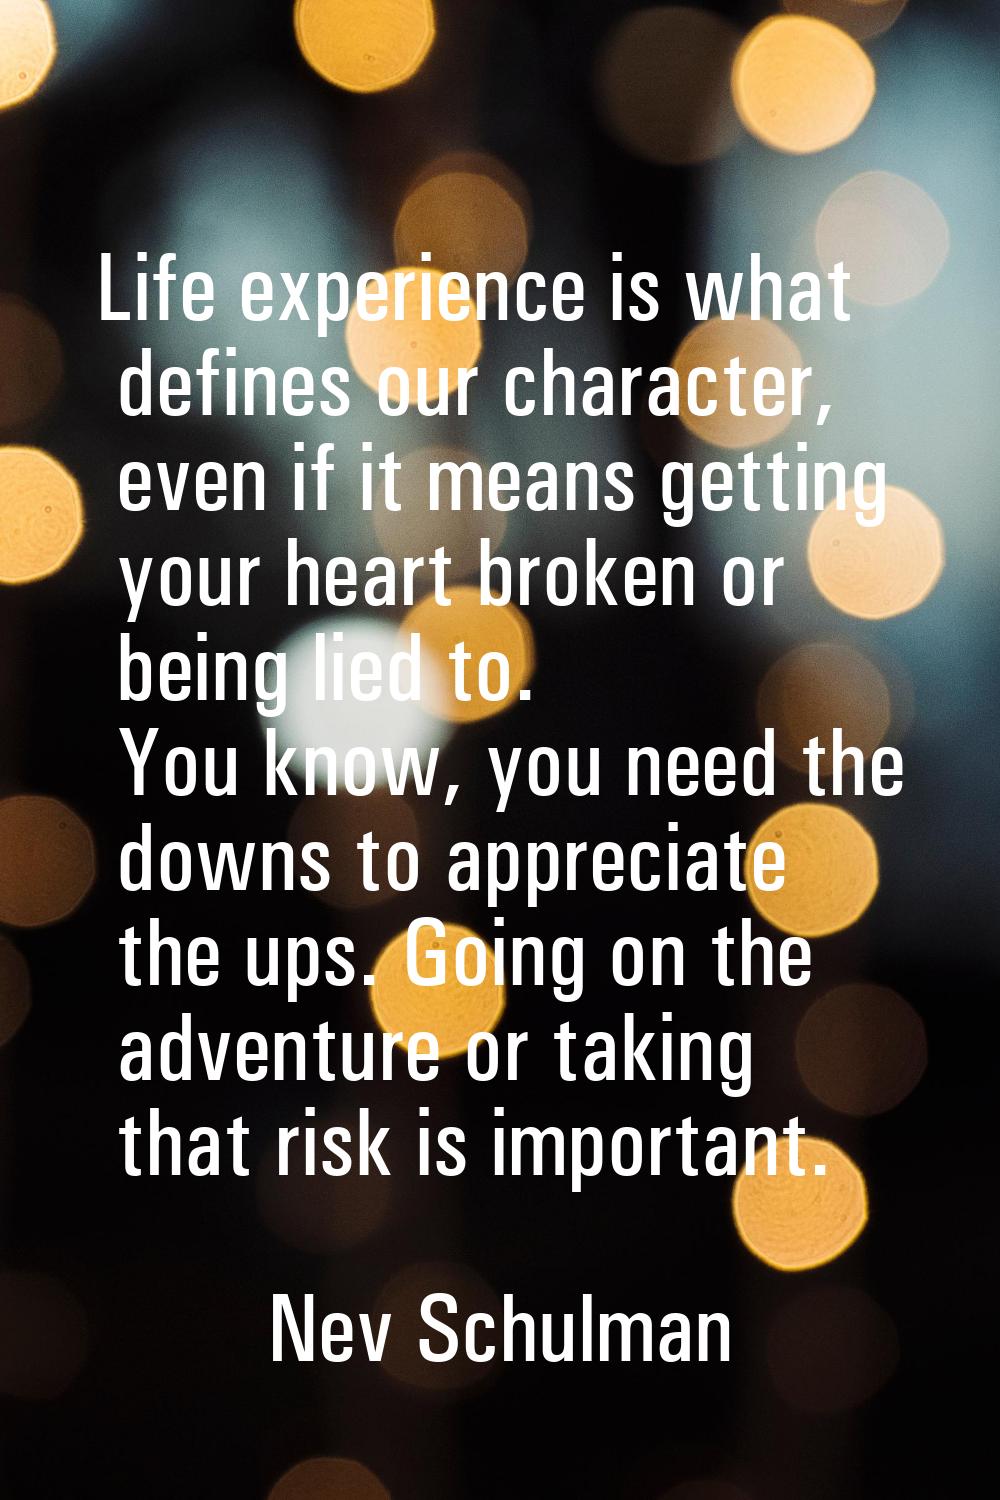 Life experience is what defines our character, even if it means getting your heart broken or being 